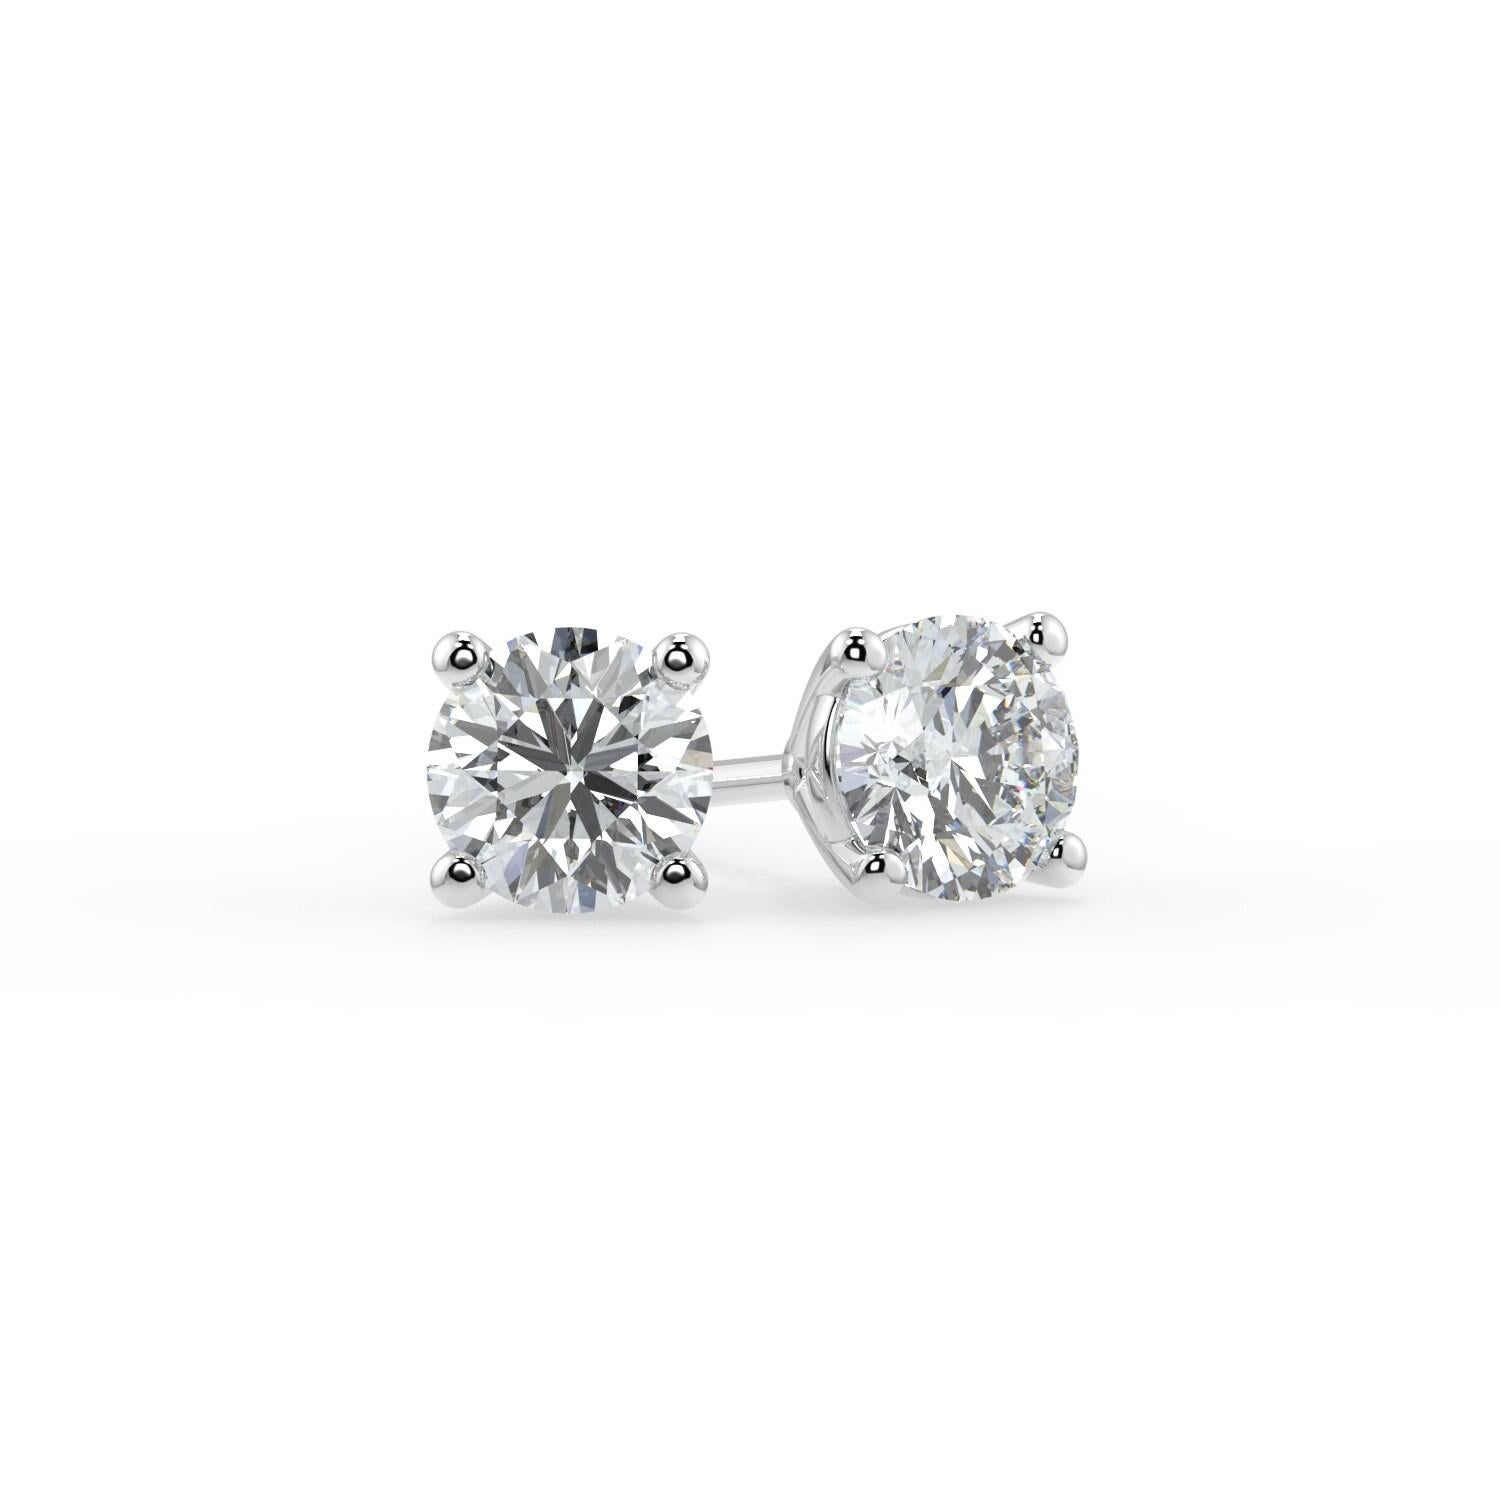 1Ct Natural White Diamond  I1 Clarity Round Shape Solitaire 4 Prong Martini Style  Unisex Studs with Butterfly Pushbacks 14K White Gold 
Specifications:
Metal: 14k gold 
Diamond Shape: Round
Natural Diamond carat weight: 1 CTW
Diamond Clarity: